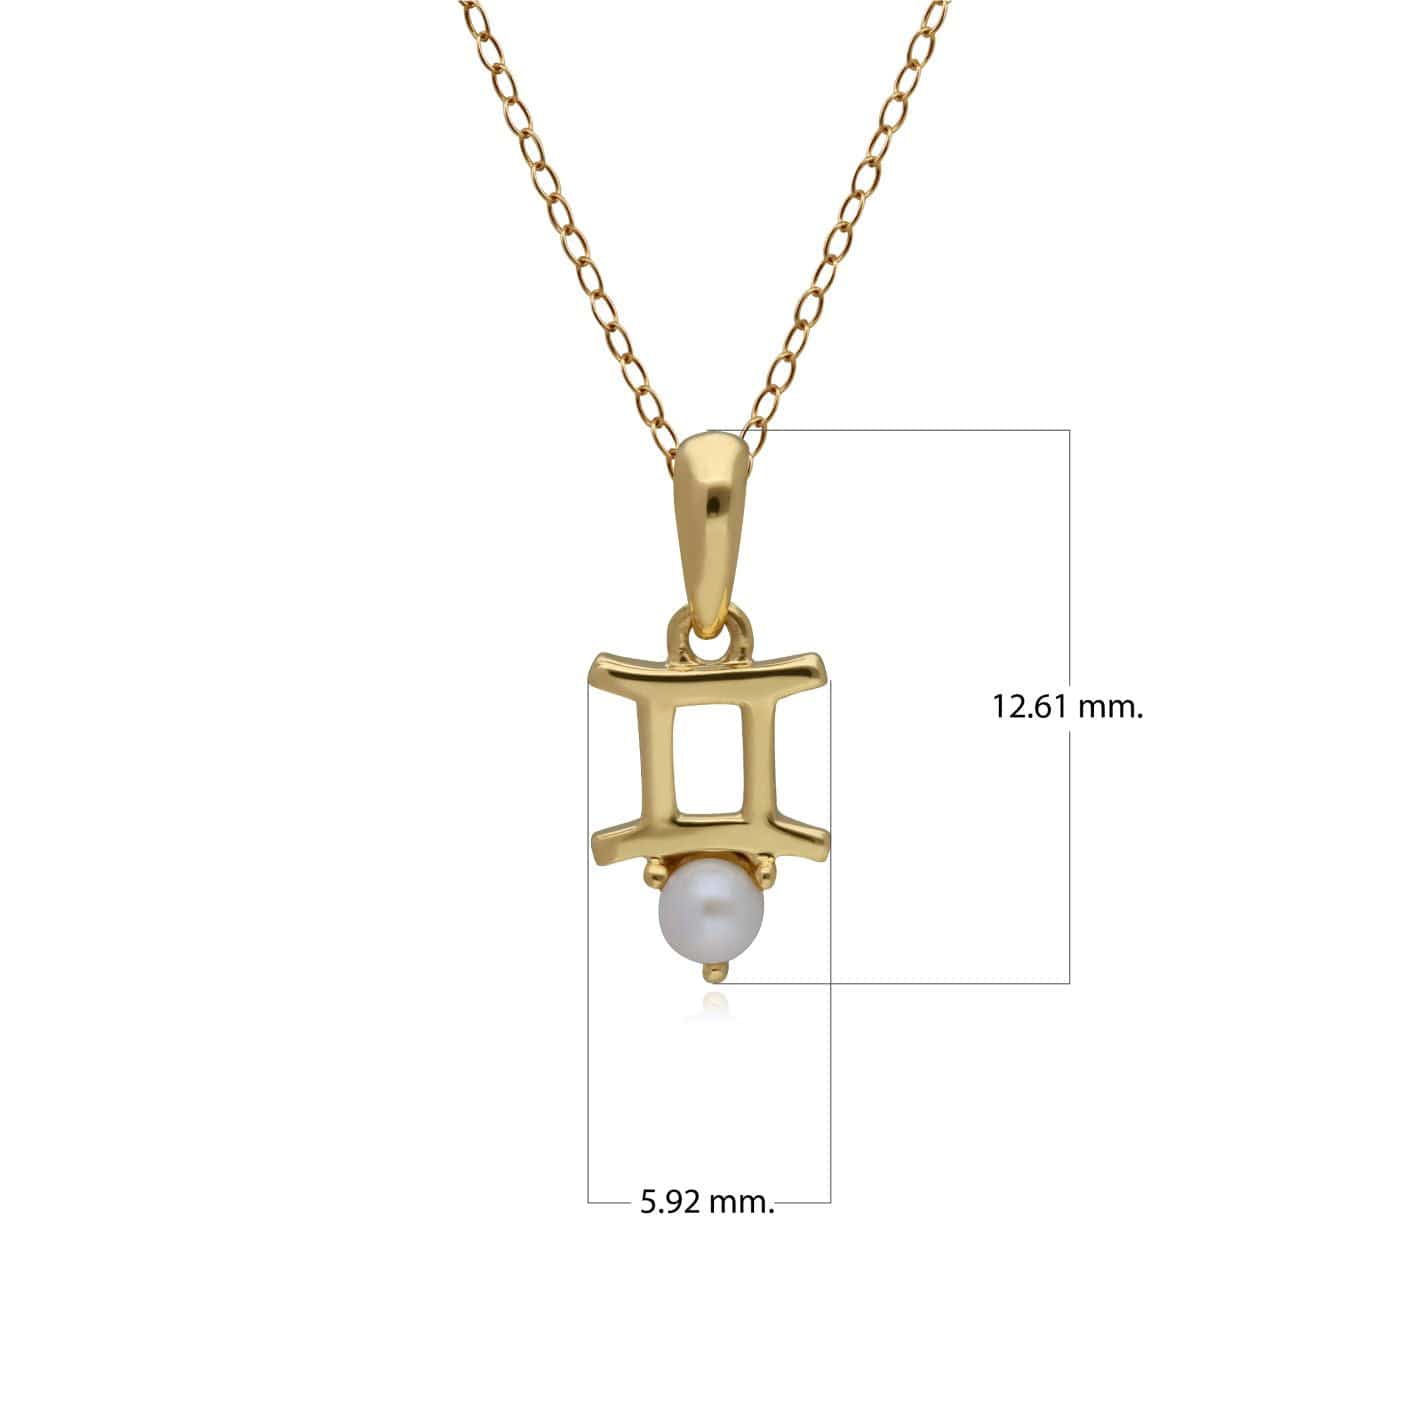 135P1997019 Pearl Gemini Zodiac Charm Necklace in 9ct Yellow Gold 2